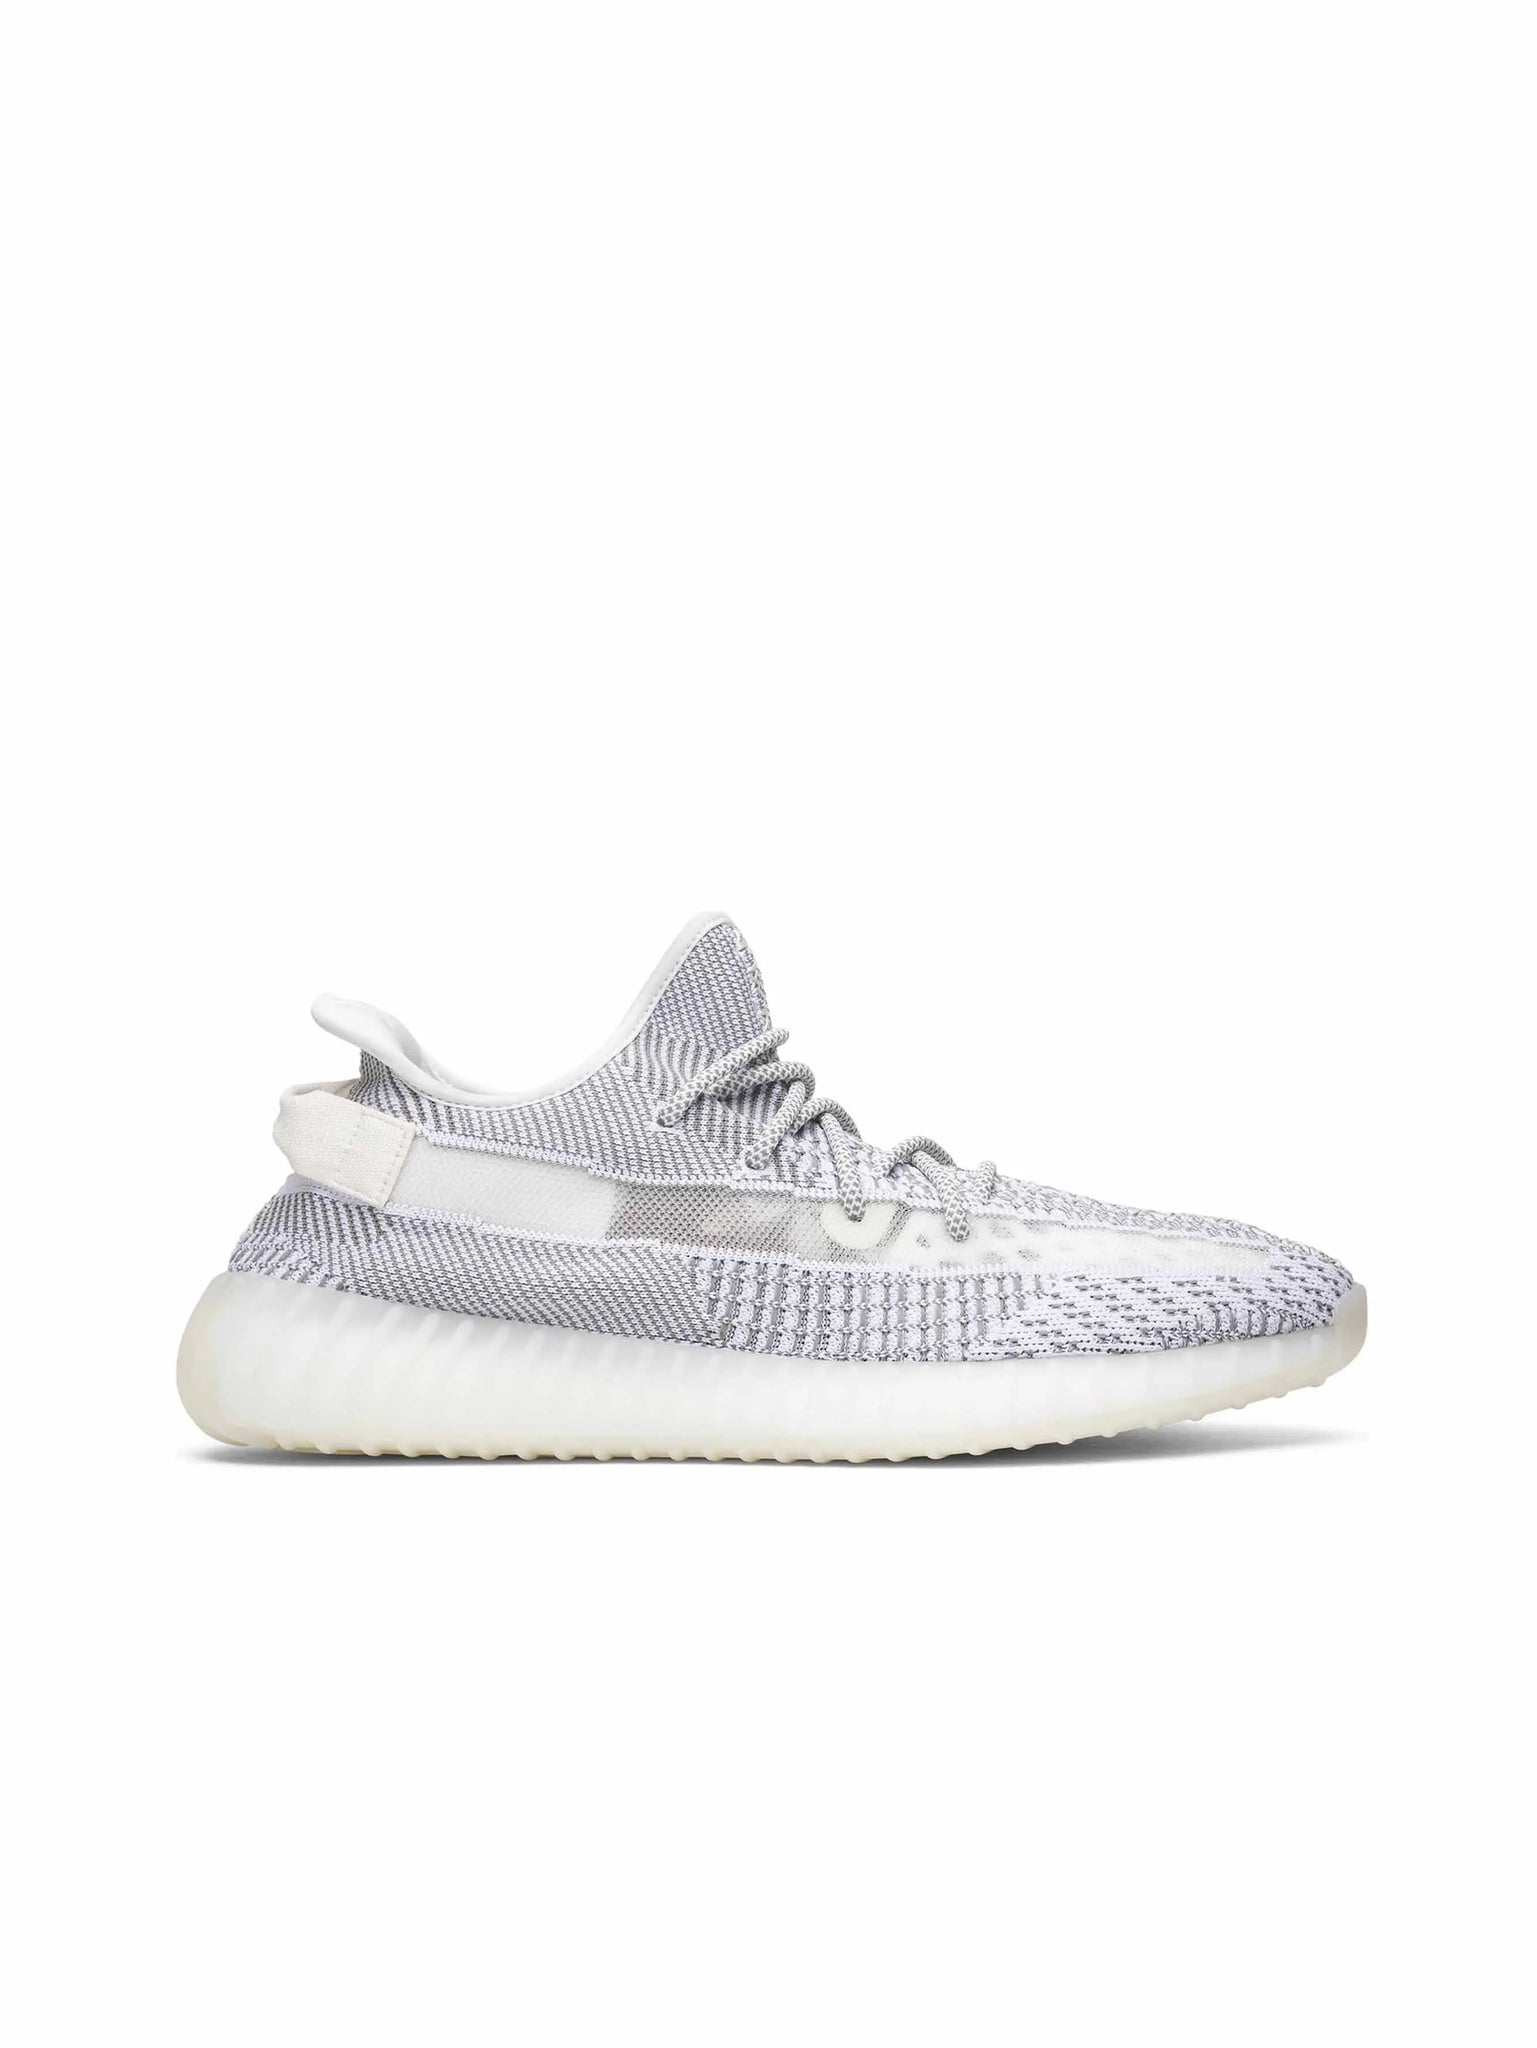 adidas Yeezy Boost 350 V2 Static (Non-Reflective) (2018/2023) - Prior